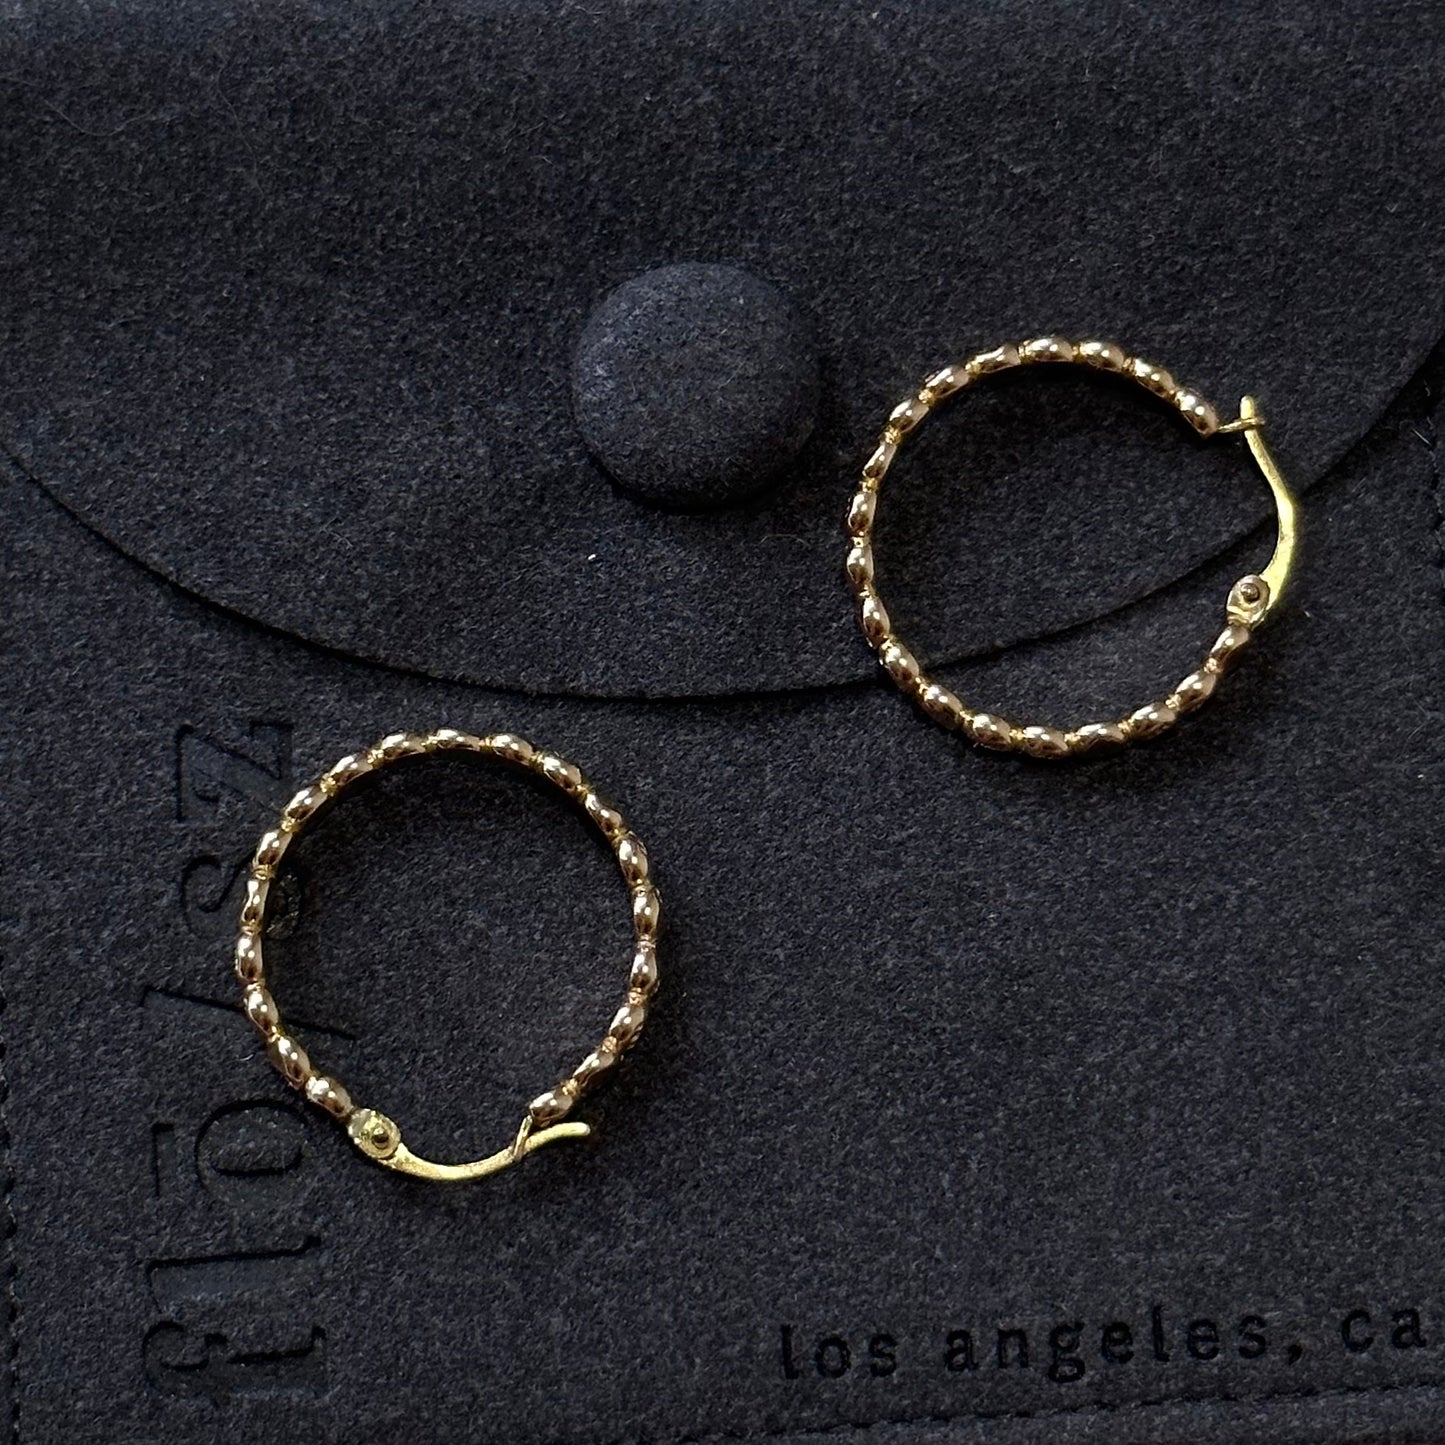 Everyday Gold Gold-filled Beaded Hoop Earrings for Sensitive Skin, Non-Tarnish, Water Resistant Gold Accessories 